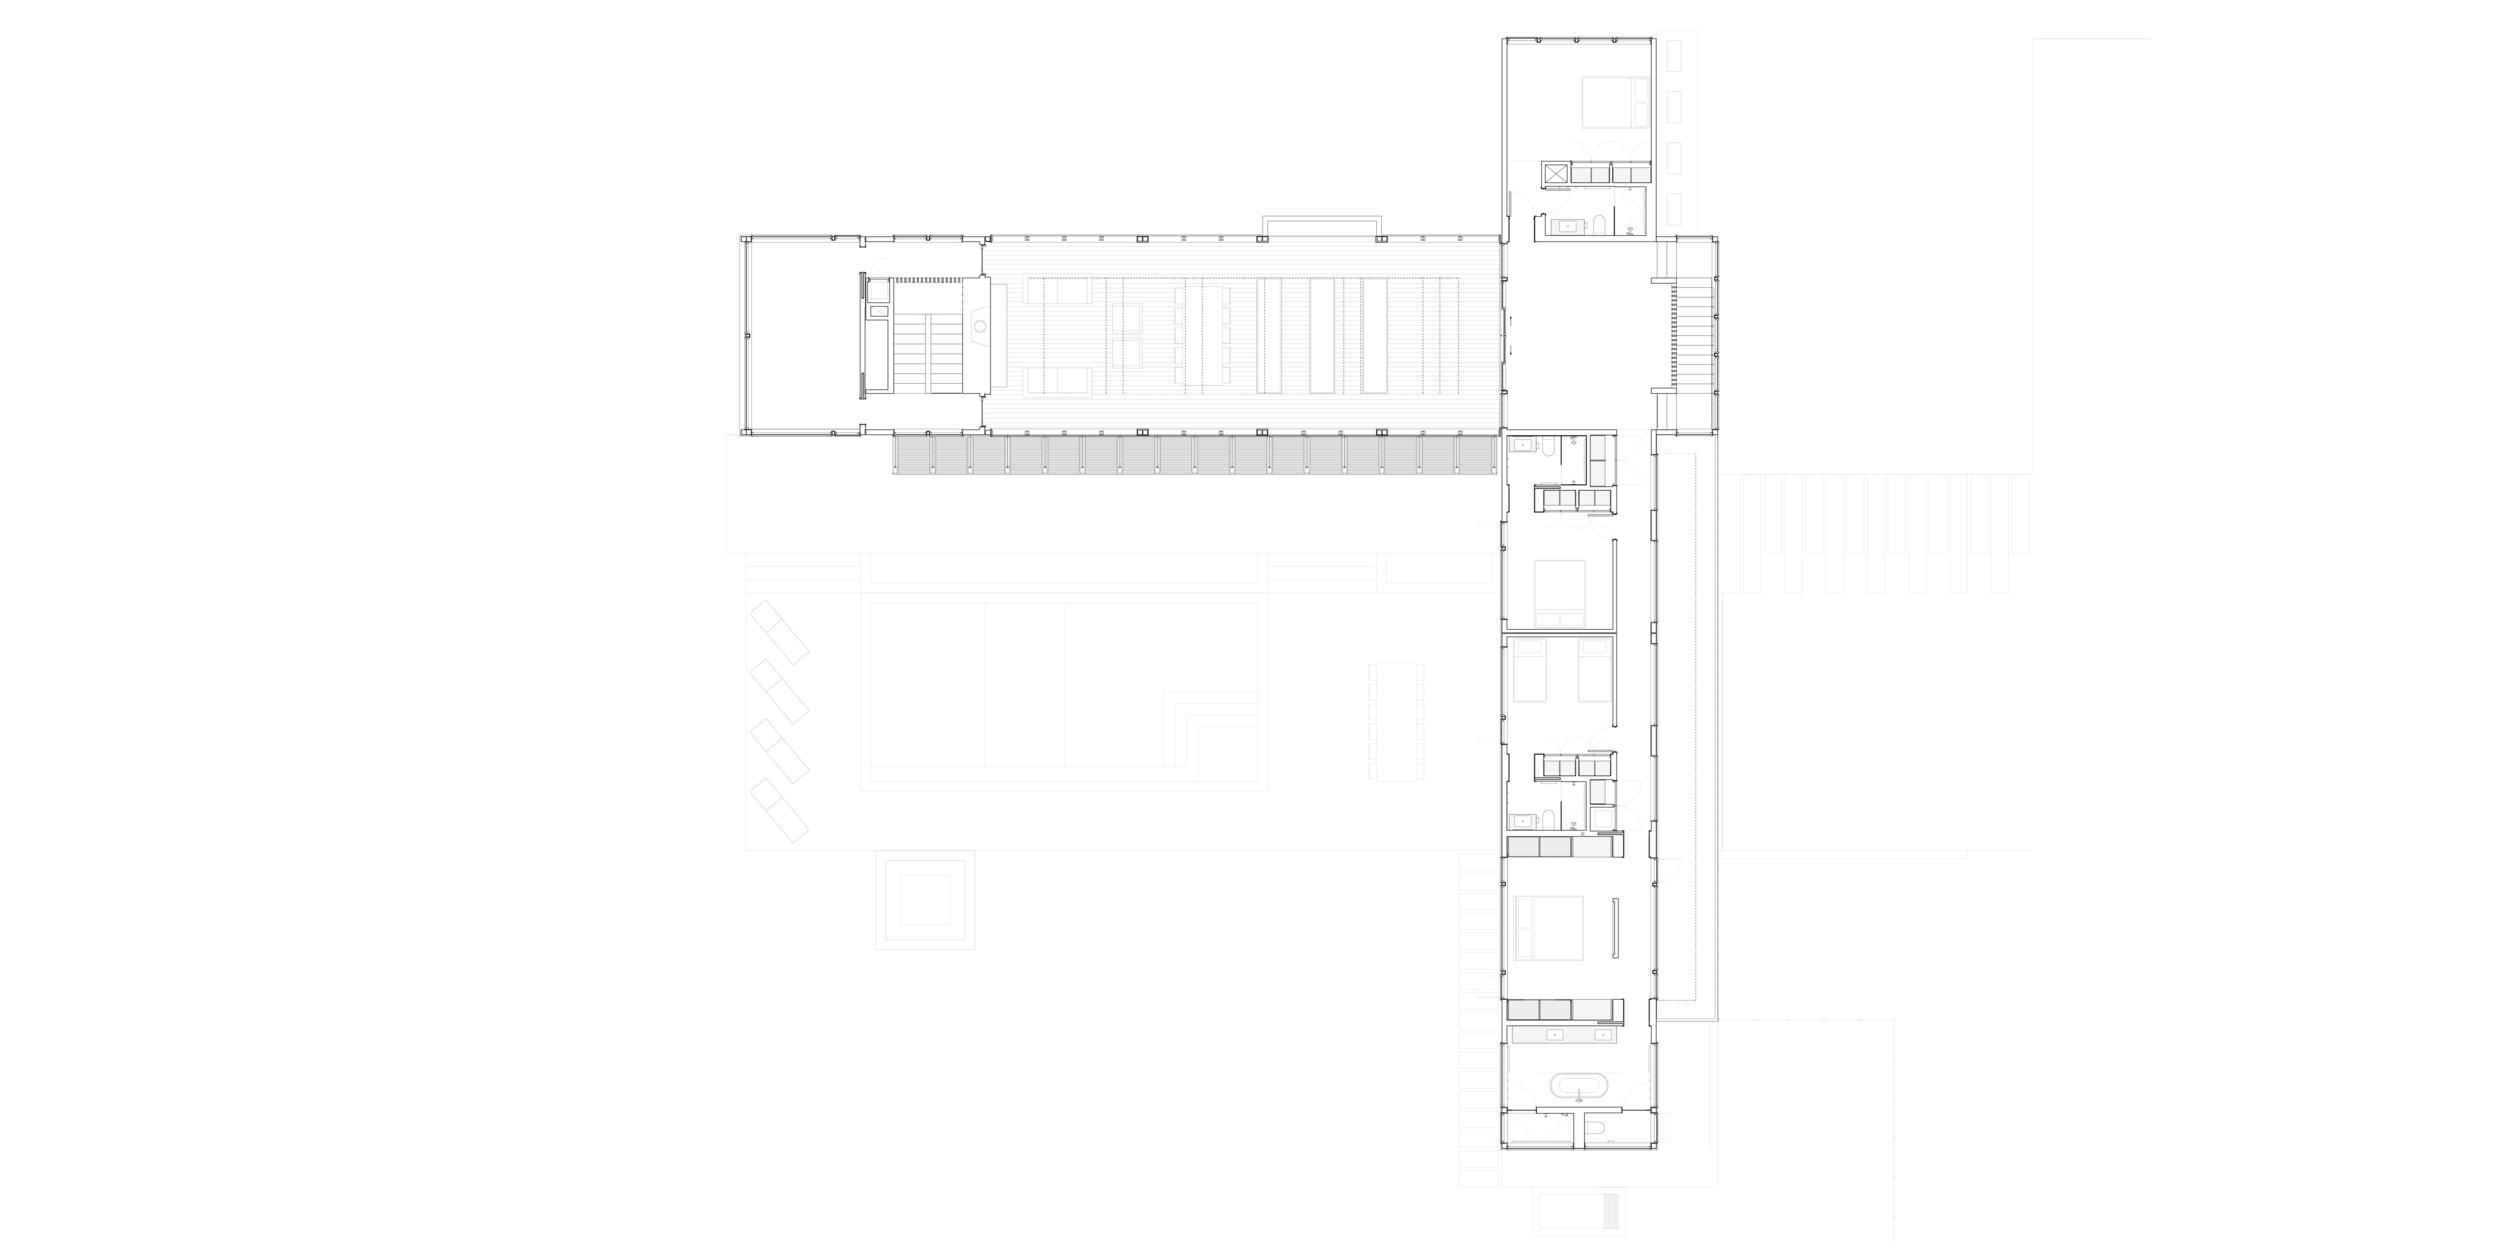 res4-resolution-4-architecture-modern-modular-great-oak-residence-prefab-home-plan-02-second floor.png